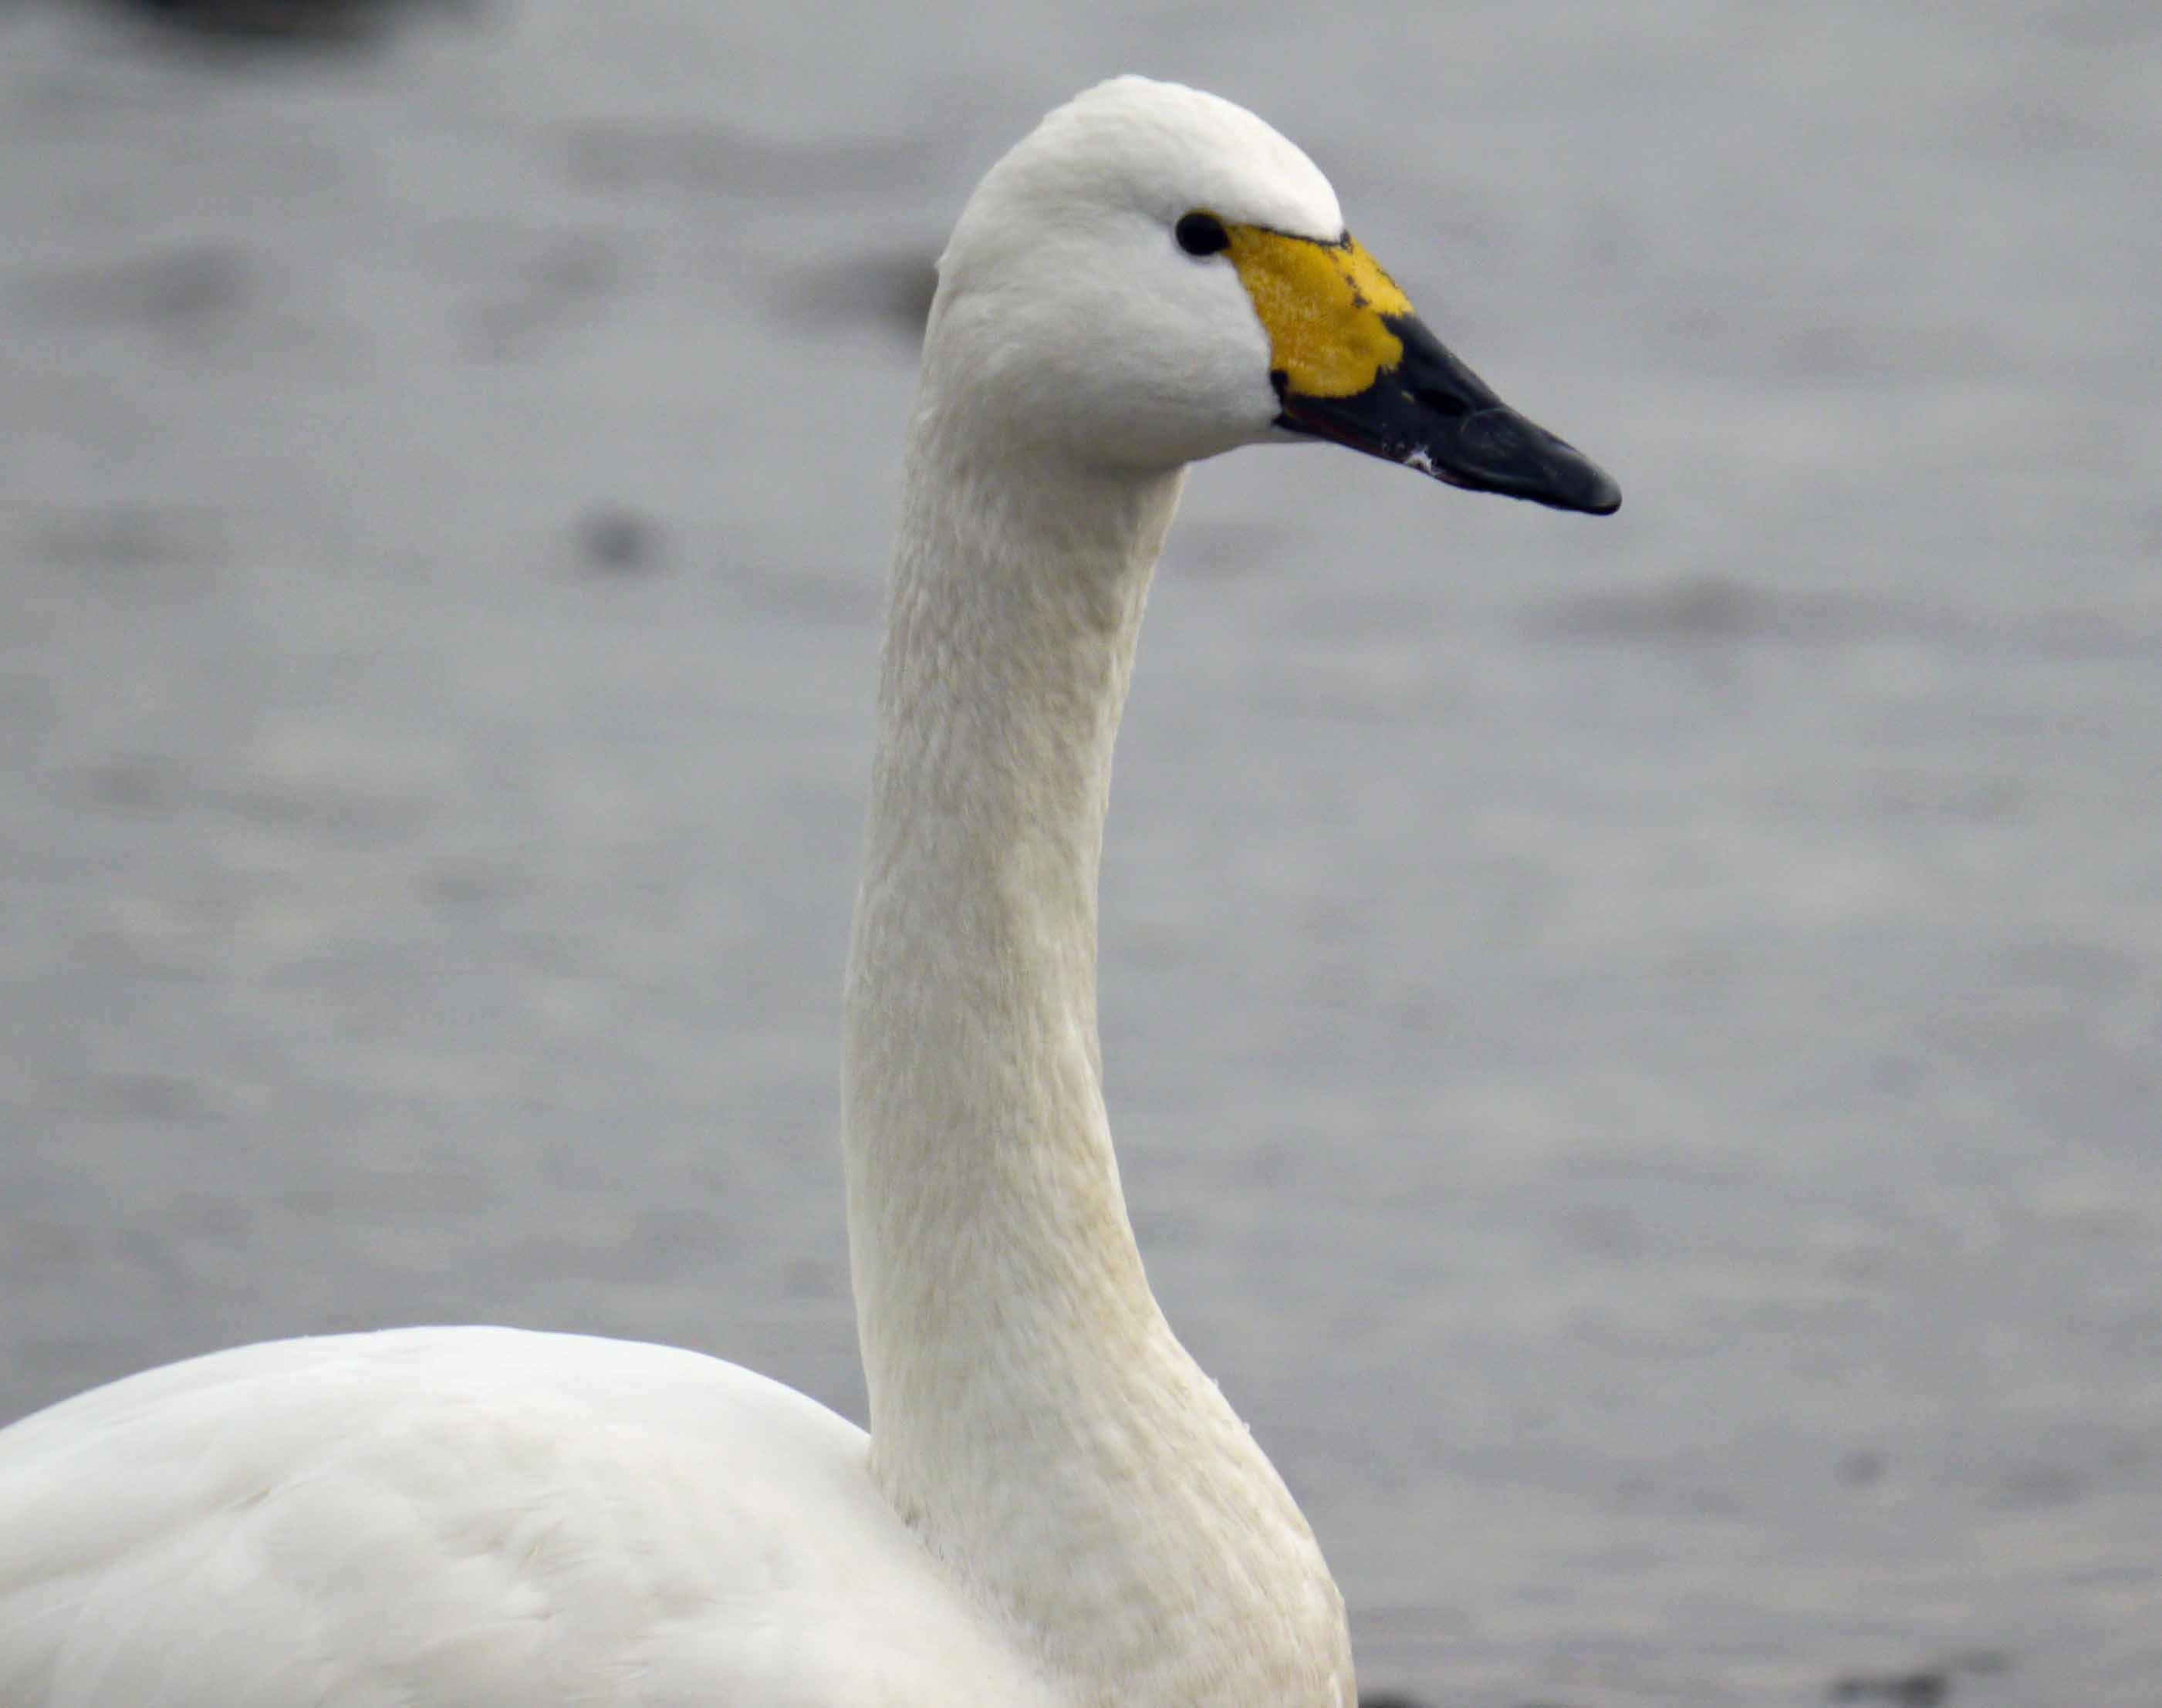 Only one Bewick's Swan remains